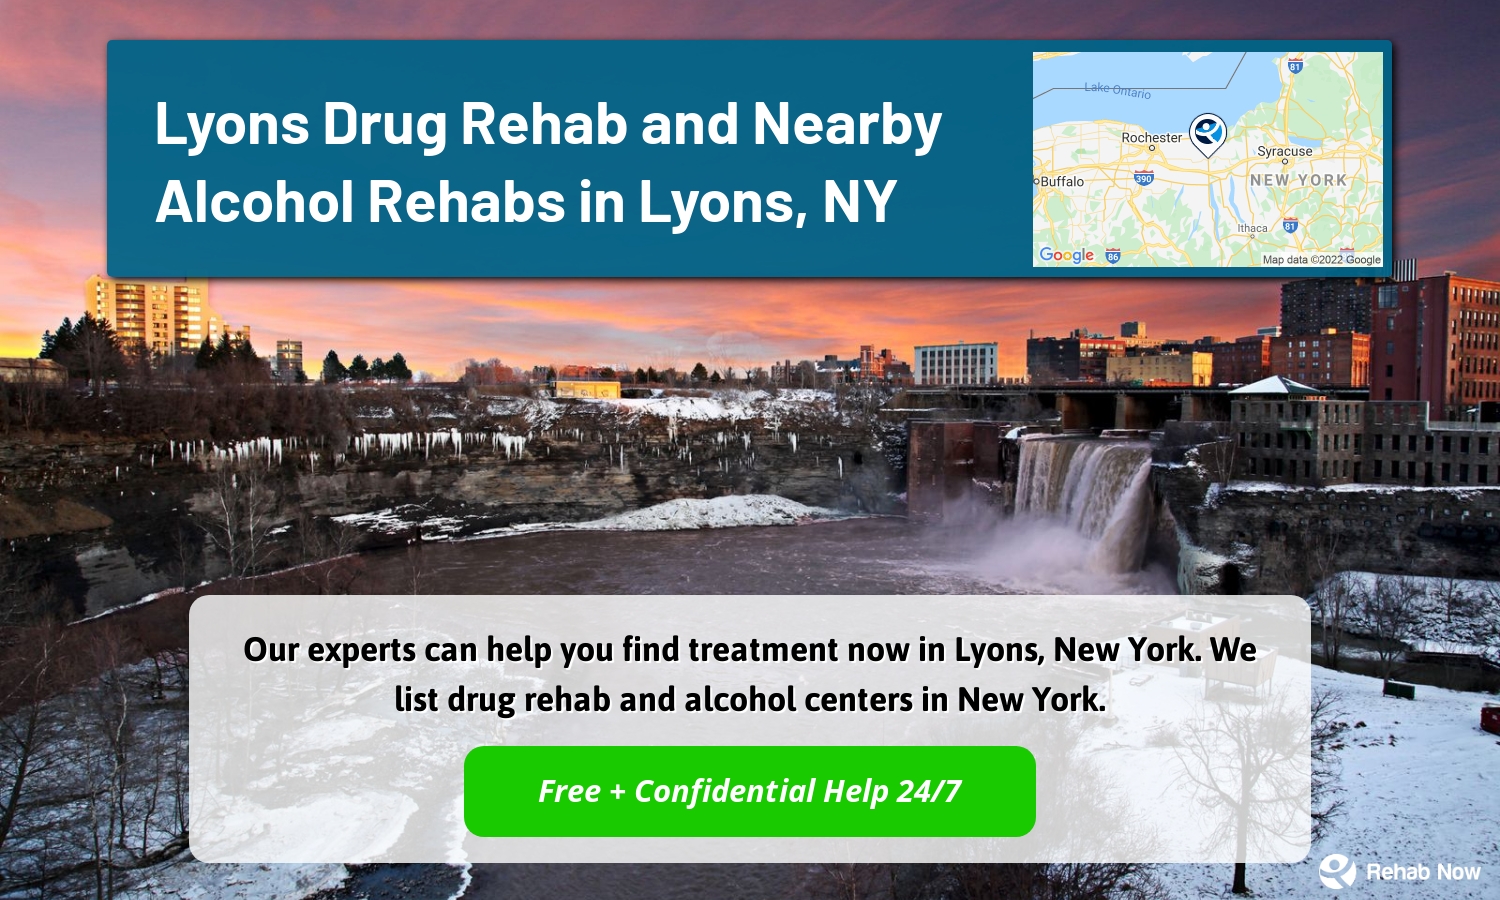 Our experts can help you find treatment now in Lyons, New York. We list drug rehab and alcohol centers in New York.